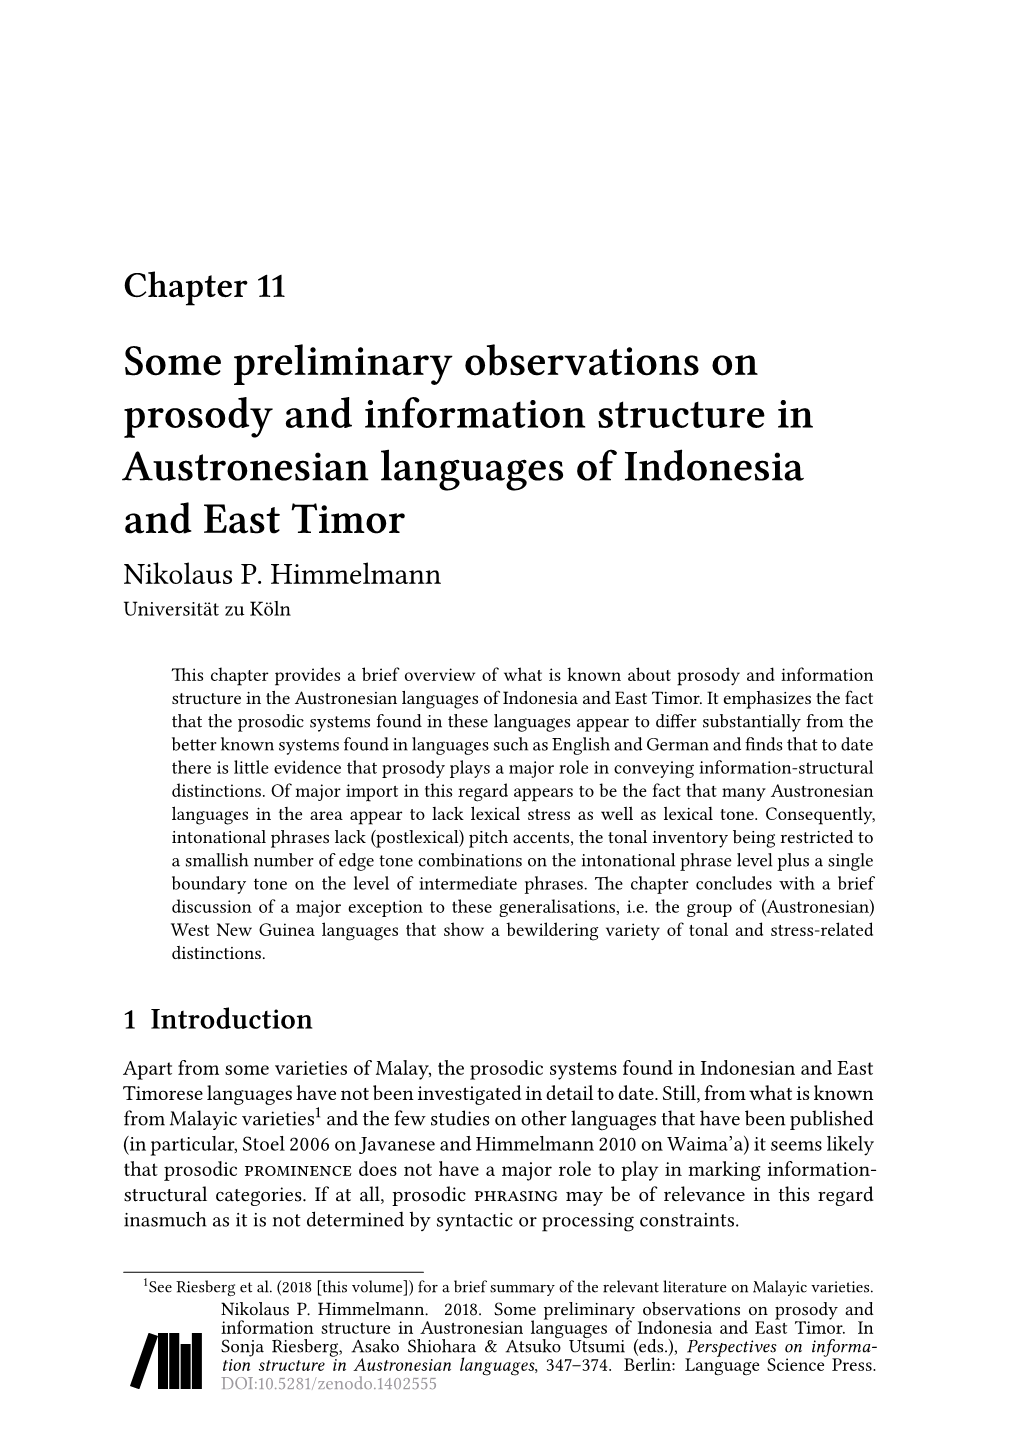 Some Preliminary Observations on Prosody and Information Structure in Austronesian Languages of Indonesia and East Timor Nikolaus P